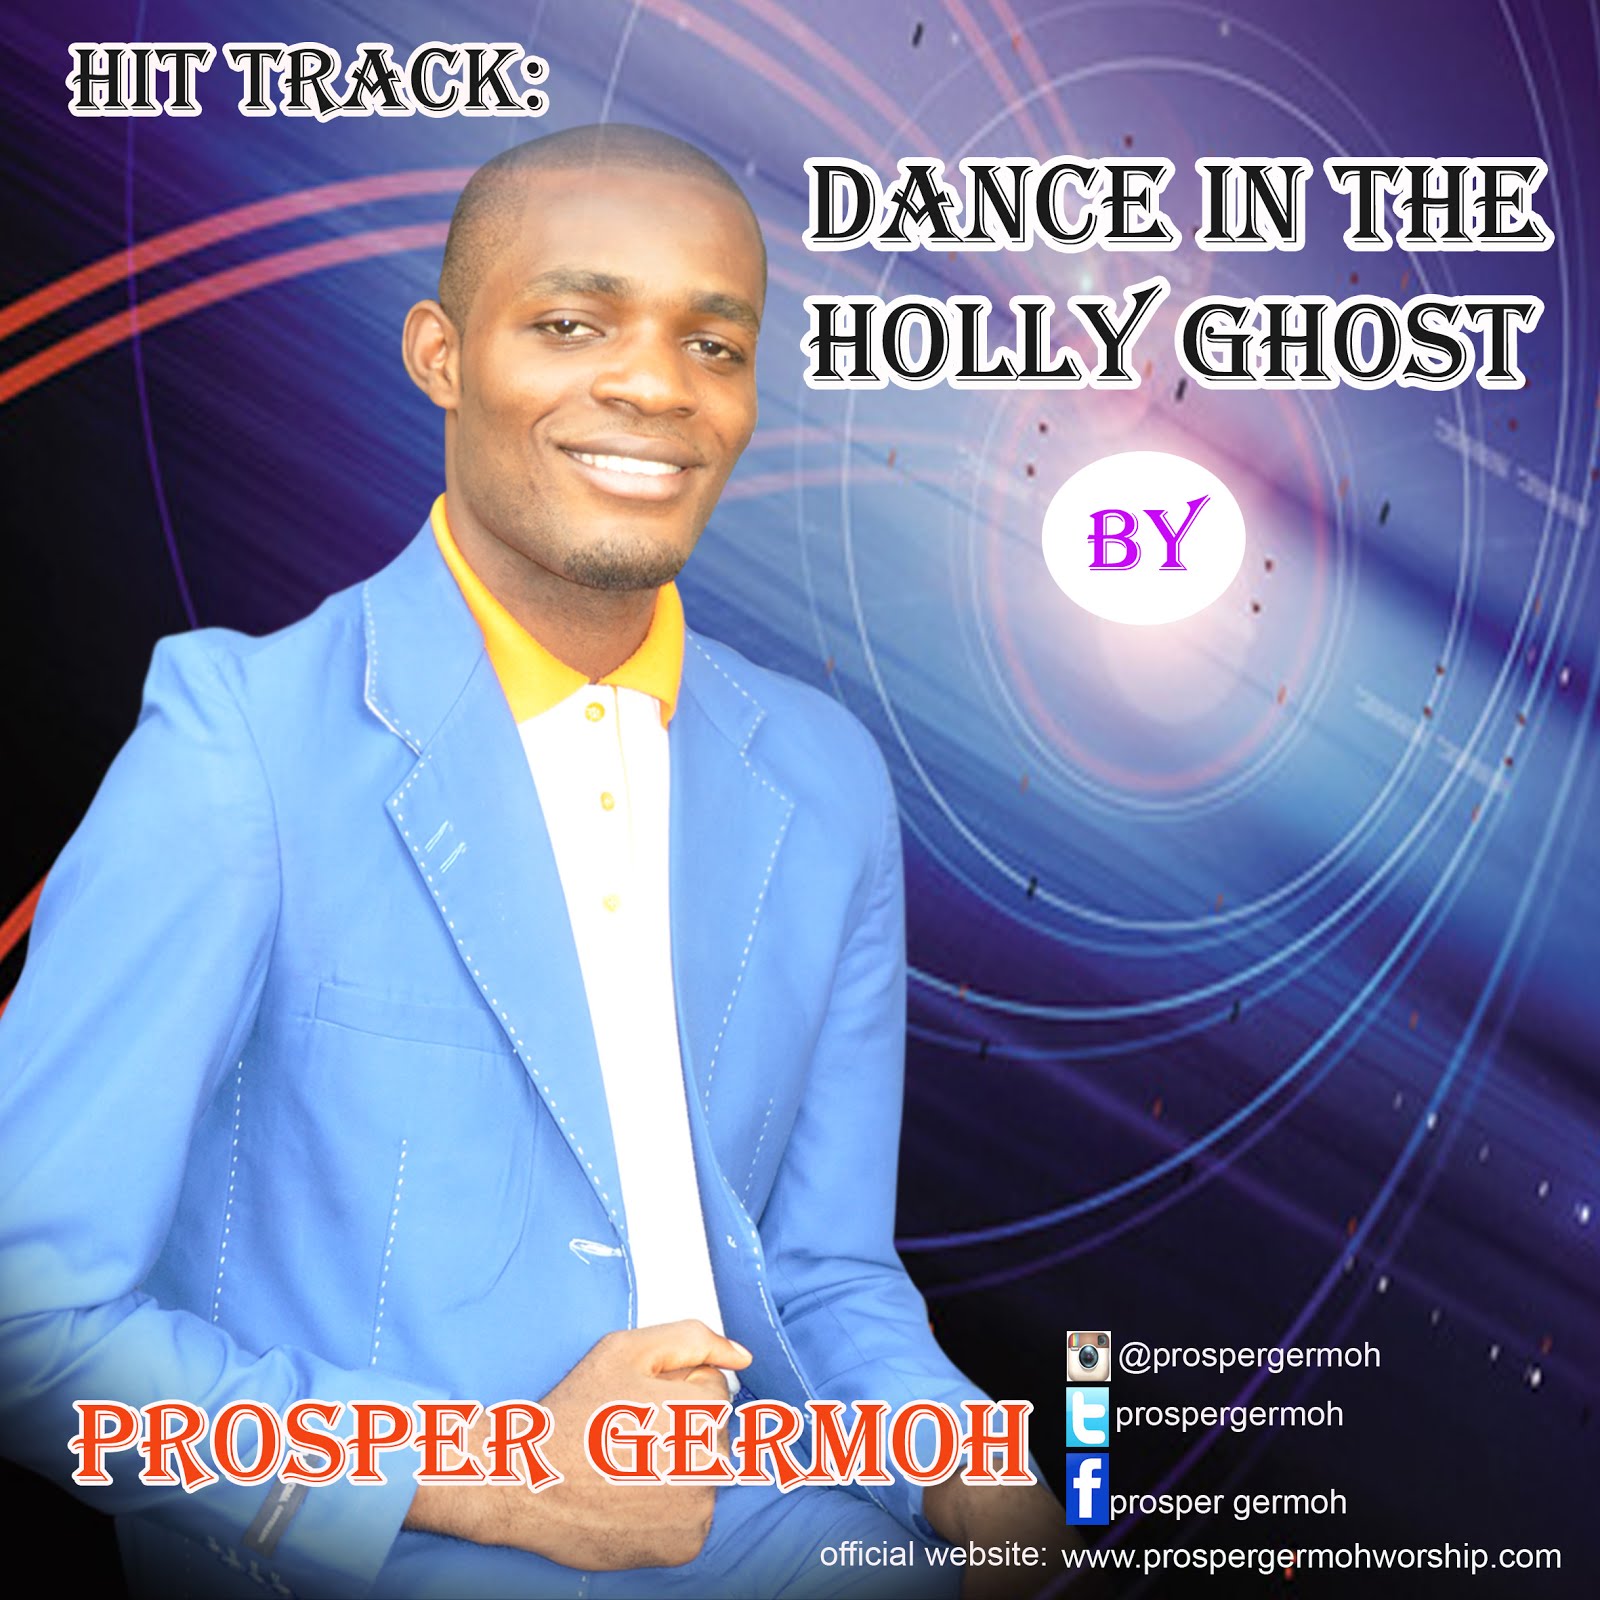 DANCE IN THE HOLY GHOST